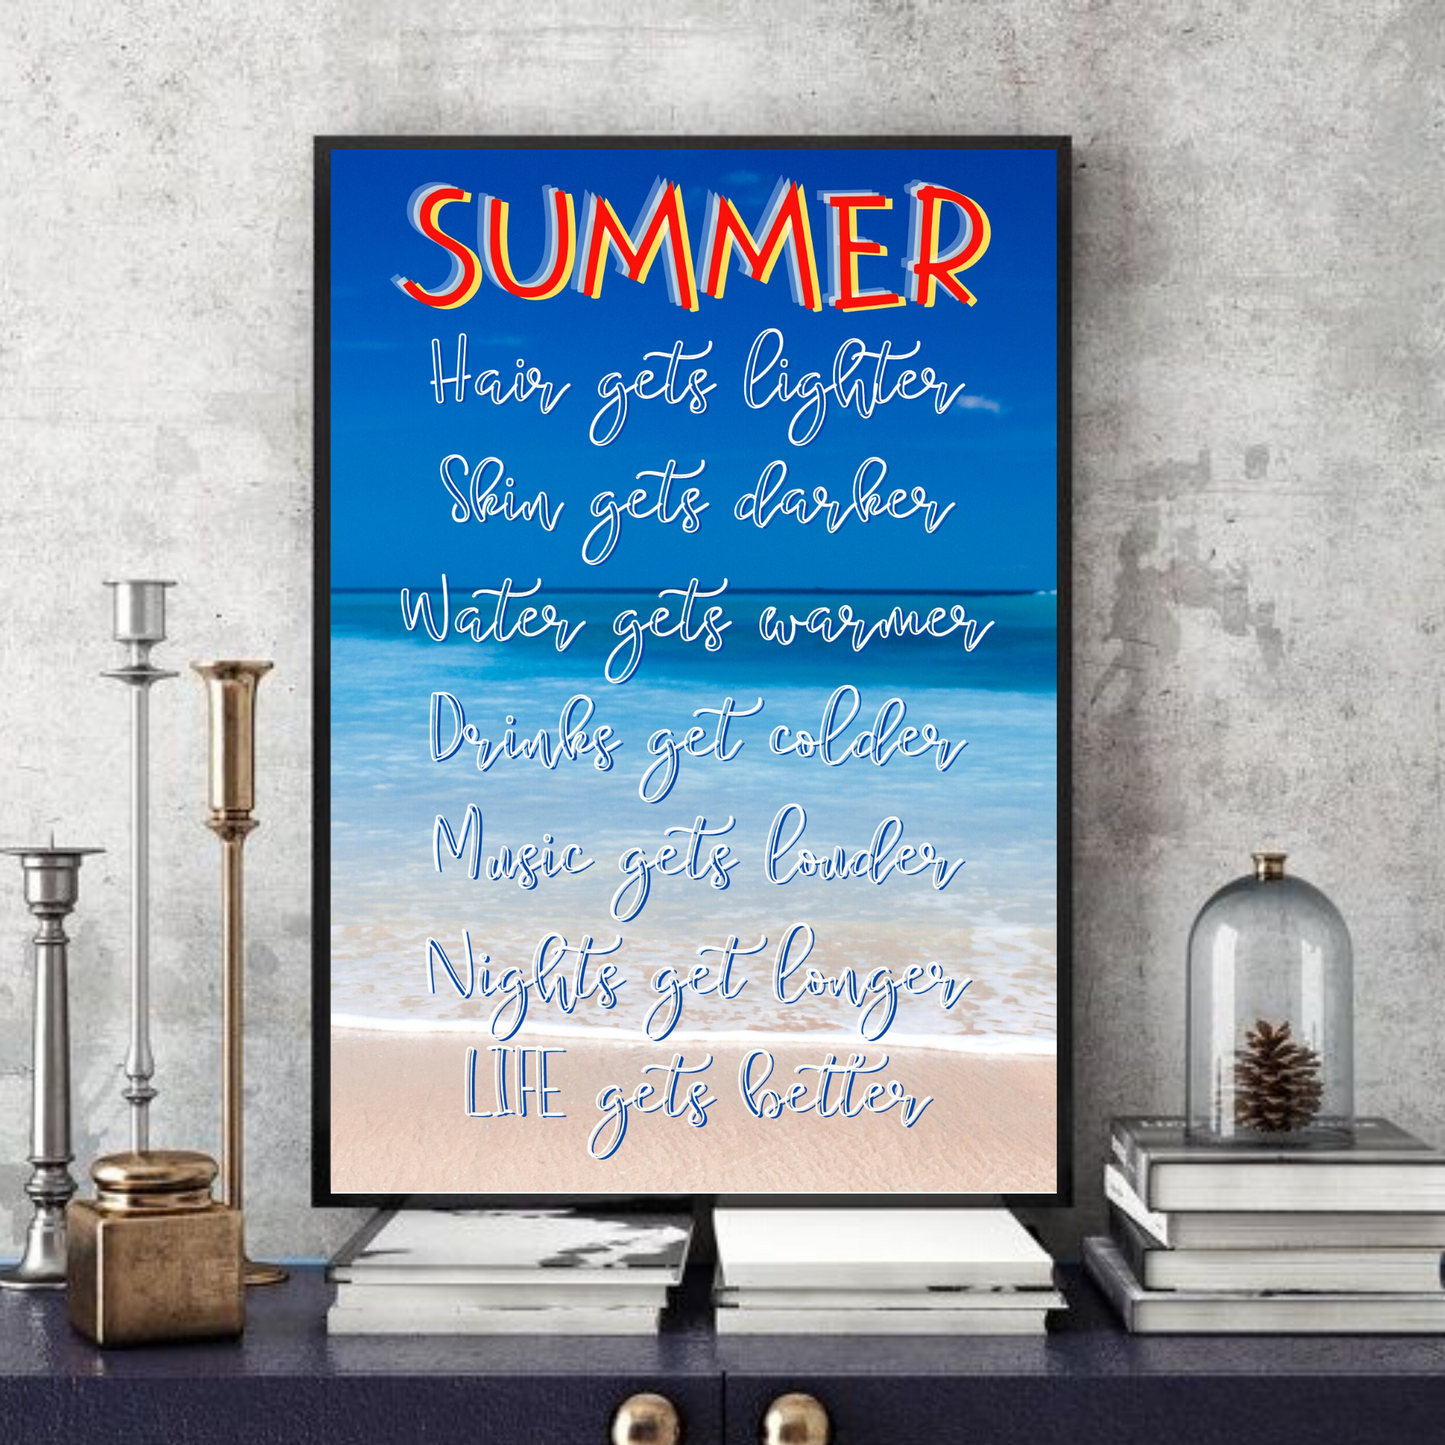 Summer (2.0) Life gets better -  Typographic Wall Art